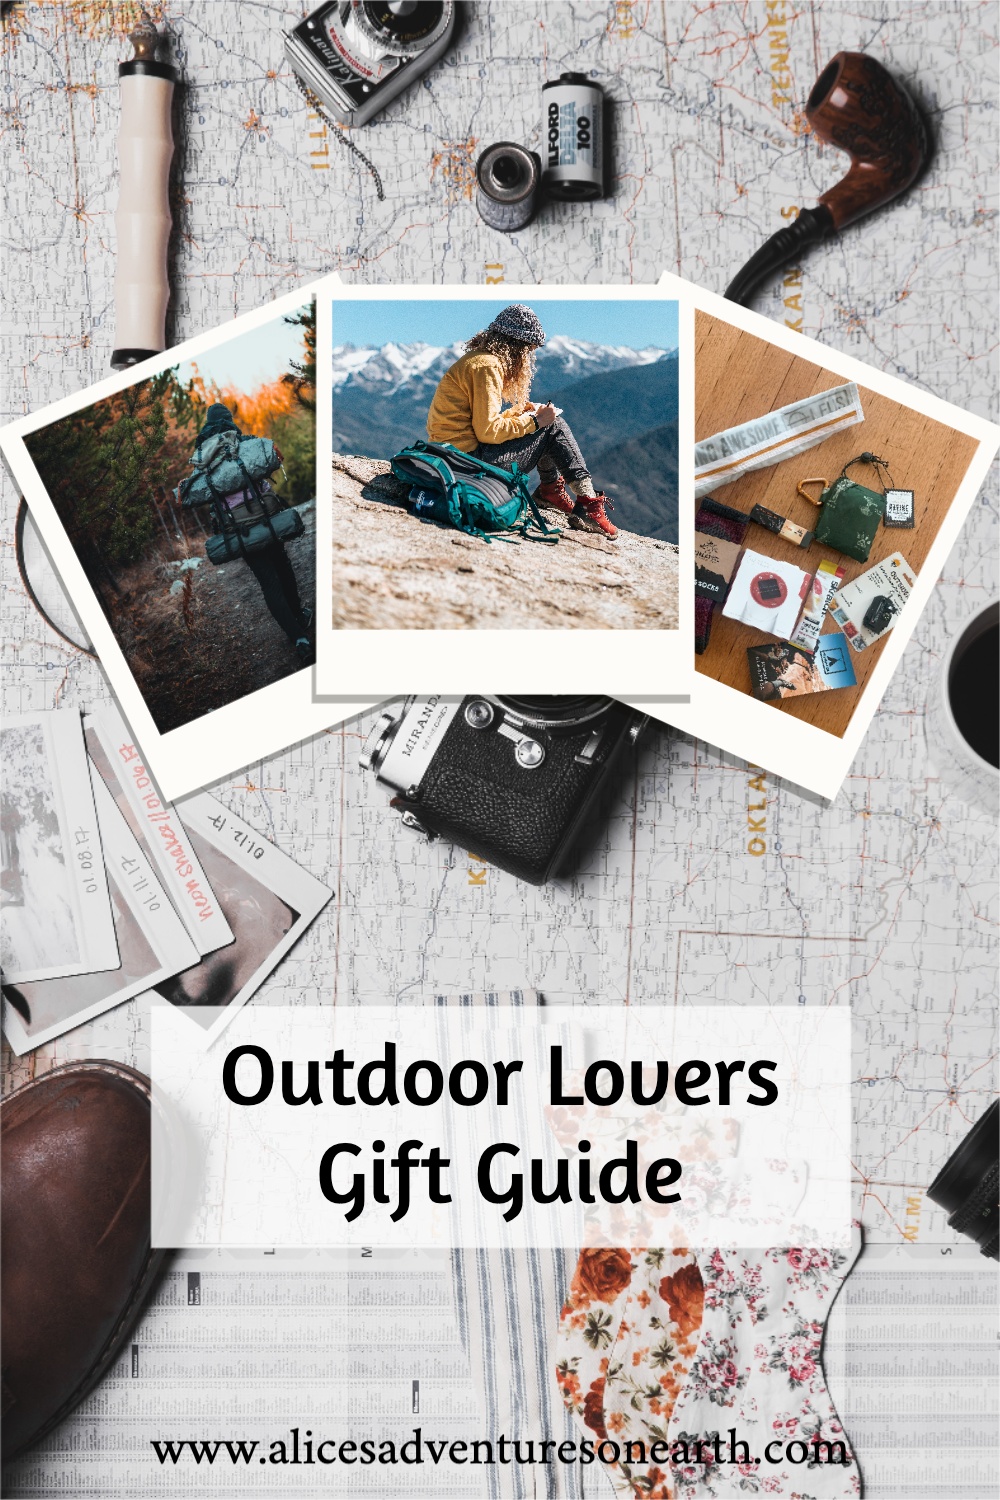 HOliday gift guide for outdoor travlers, hikers and backpackers 